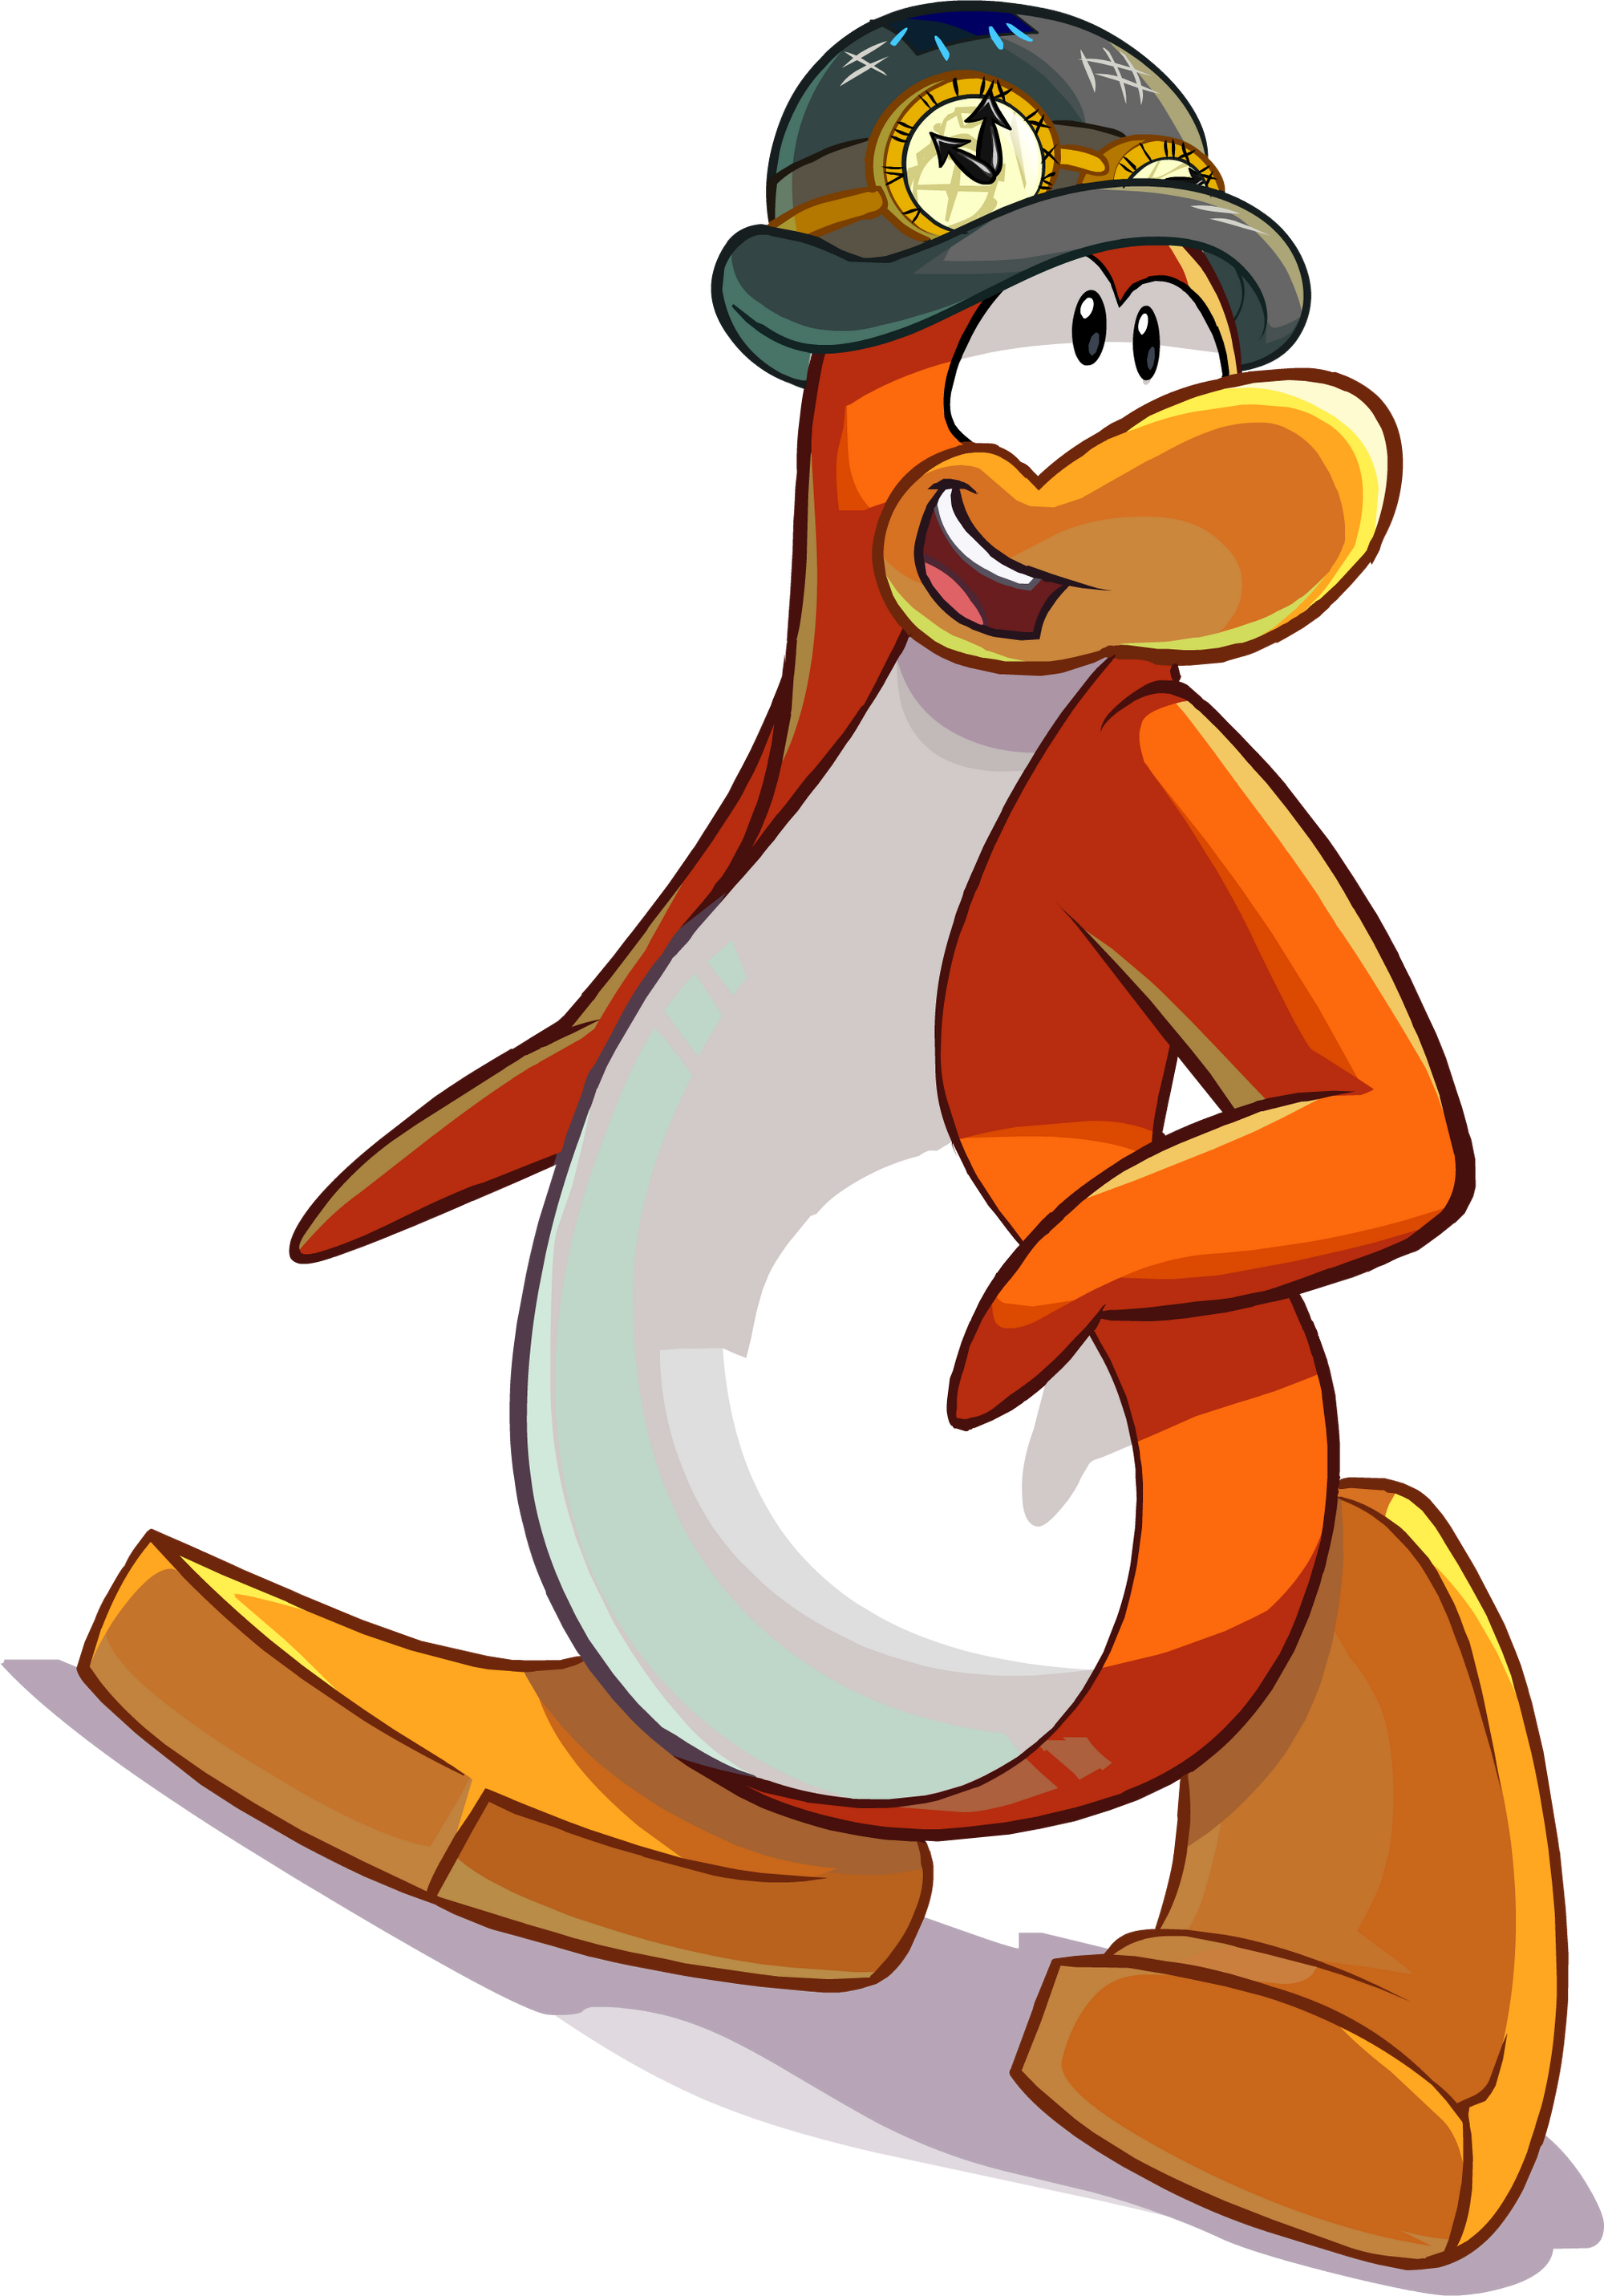 Categorystage Characters Club Penguin Wiki Fandom Powered By Wikia